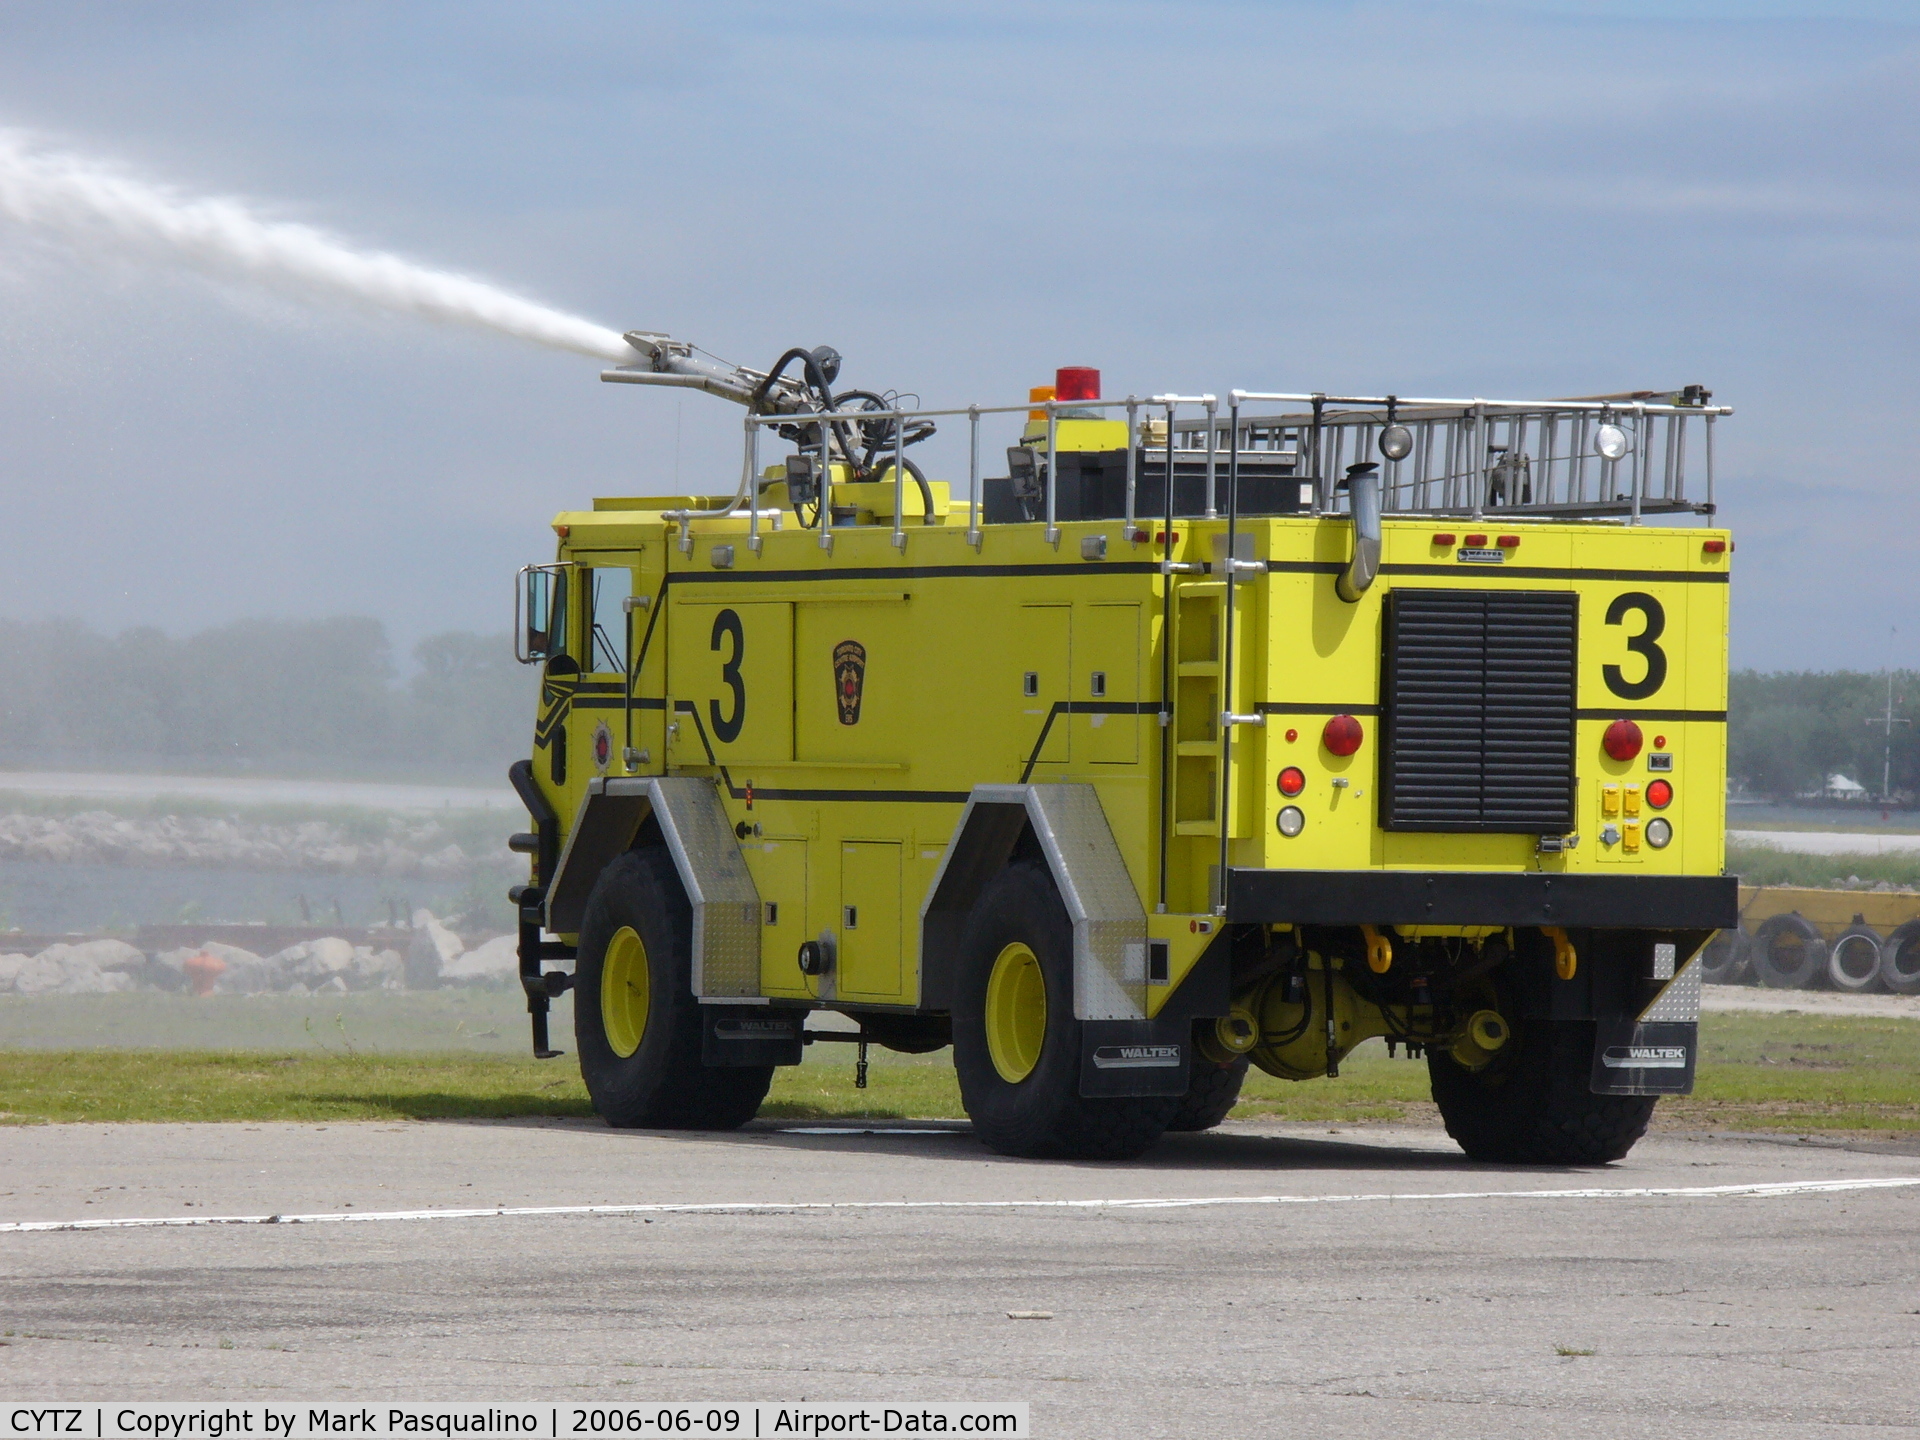 Toronto City Centre Airport, Toronto, Ontario Canada (CYTZ) - Fire Truck used for geese and seagull control